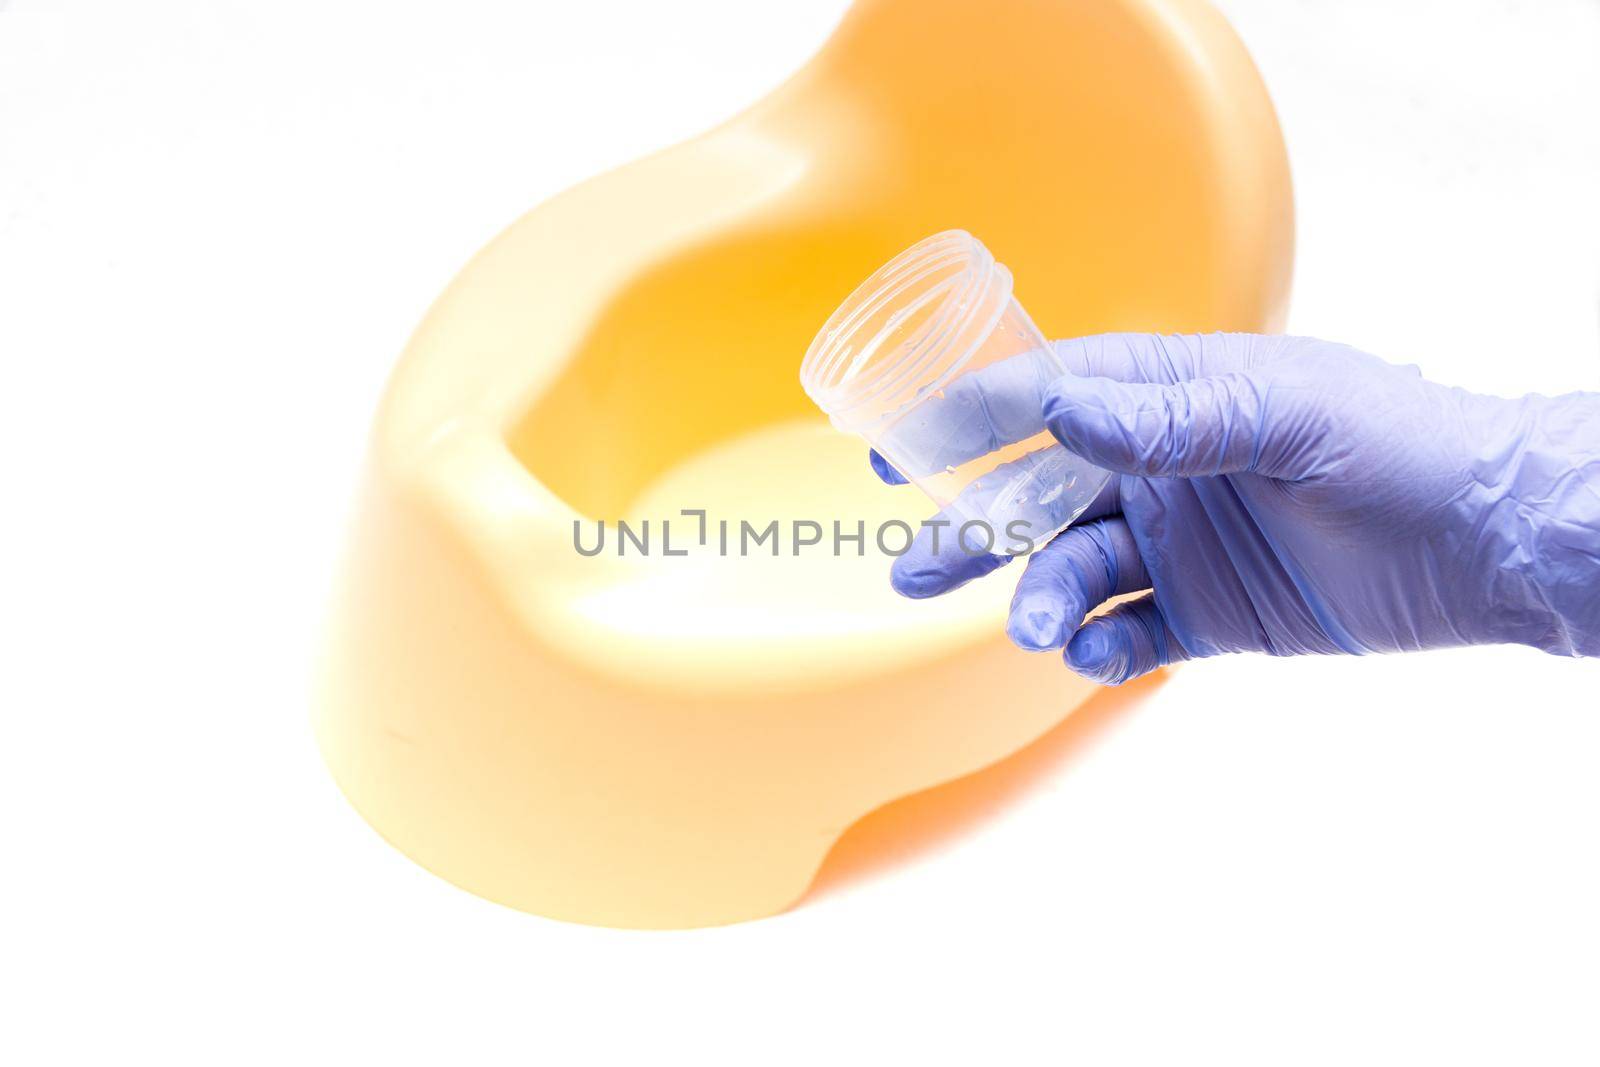 female hand with a blue disposable medical glove jerks a jar for analysis against the background of a yellow child pot, collecting urine clinical diagnosis, copy location, light background